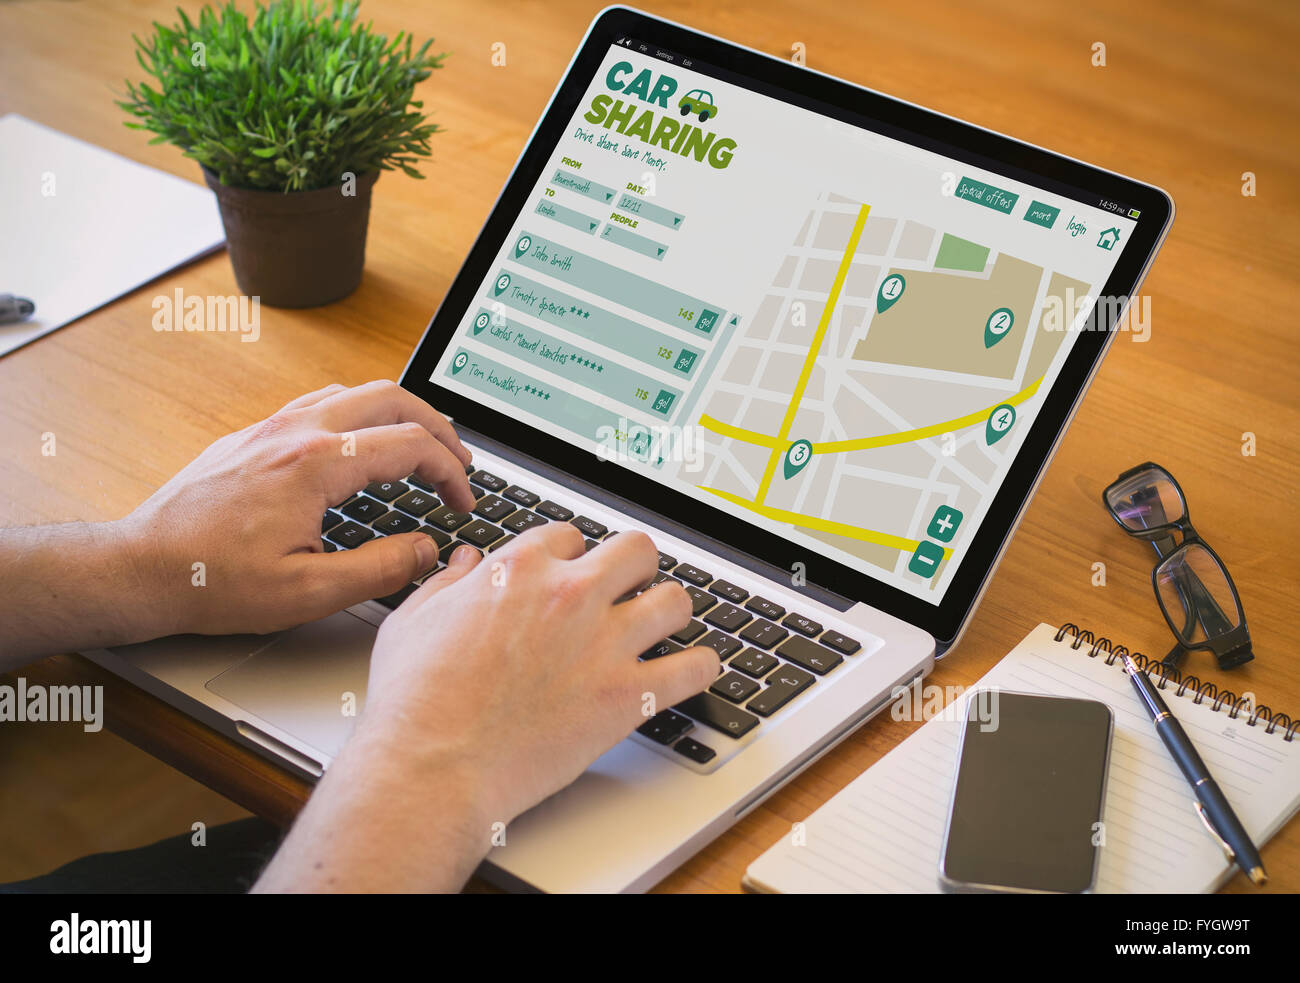 Businessman at work. Close-up top view of man working on laptop car sharing. All screen graphics are made up. Stock Photo